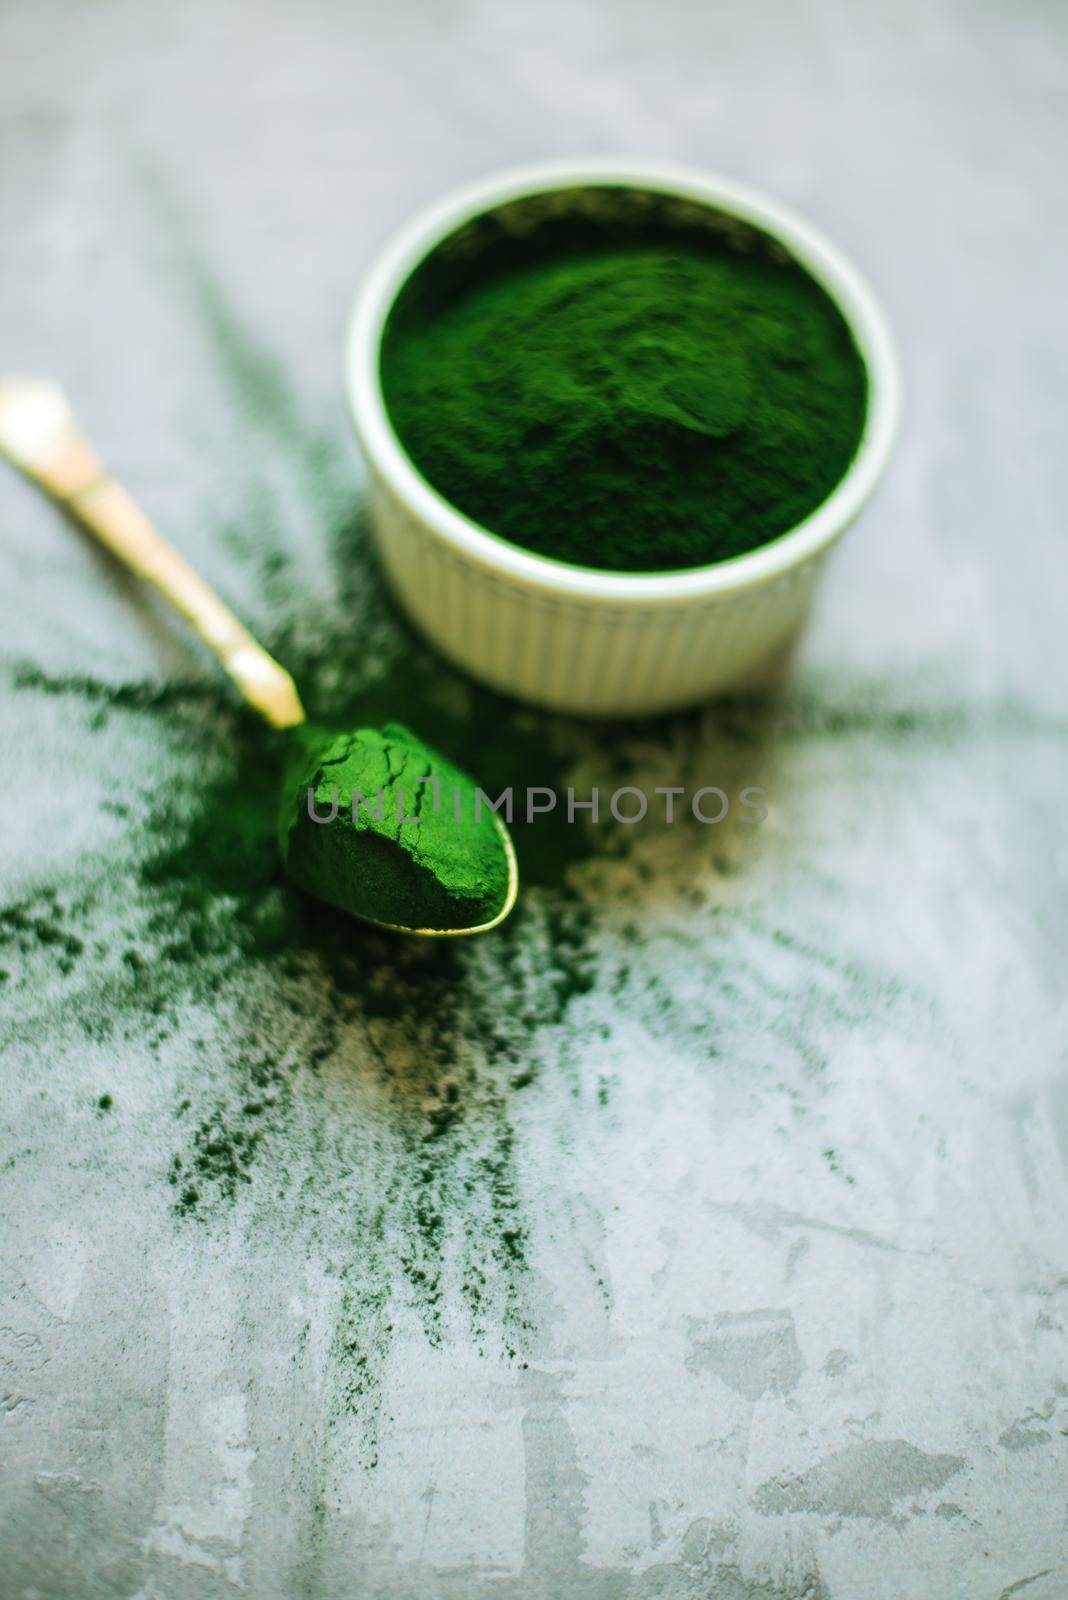 spirulina powder in white plate on concrete background. High quality photo